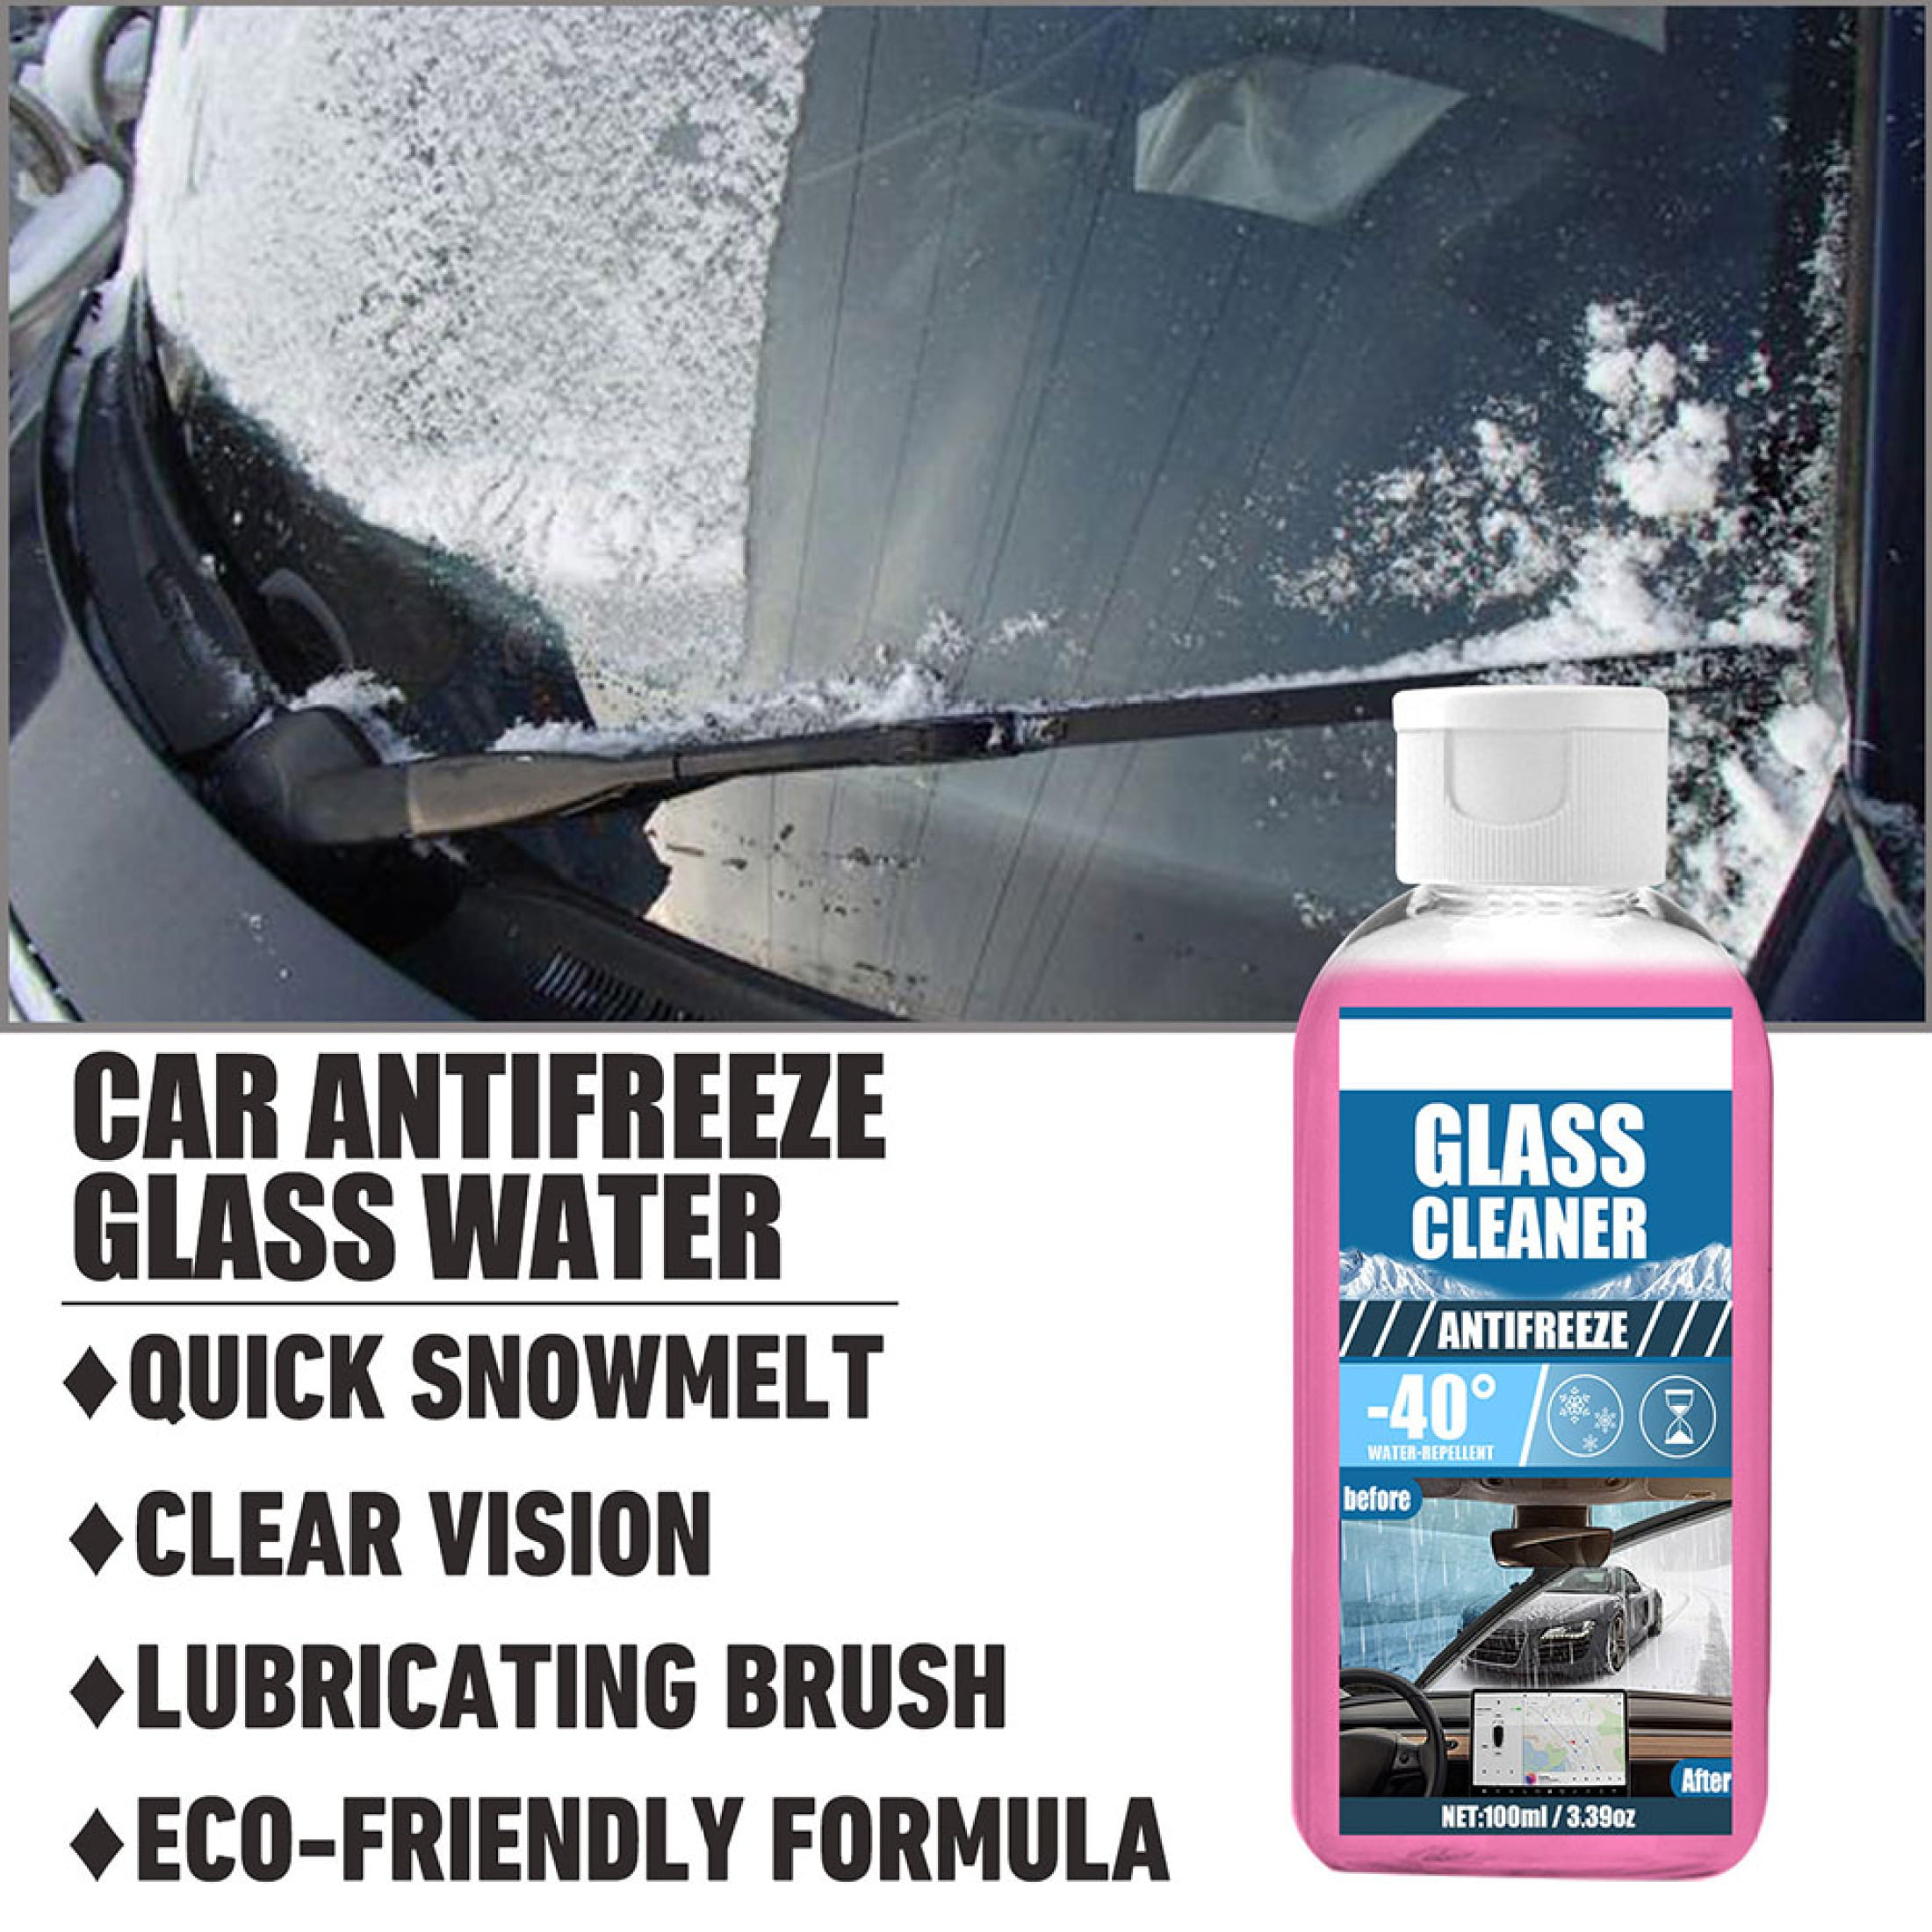  Deicer and Snow Removal, 100ml Windshield Deicer Spray, Ice  Melt Spray Windshield De-Icer with Salt Free Ingredients, Safe Deicer for  Car Windshield, Ice Melting Spray for Home Use & Car Windshield 